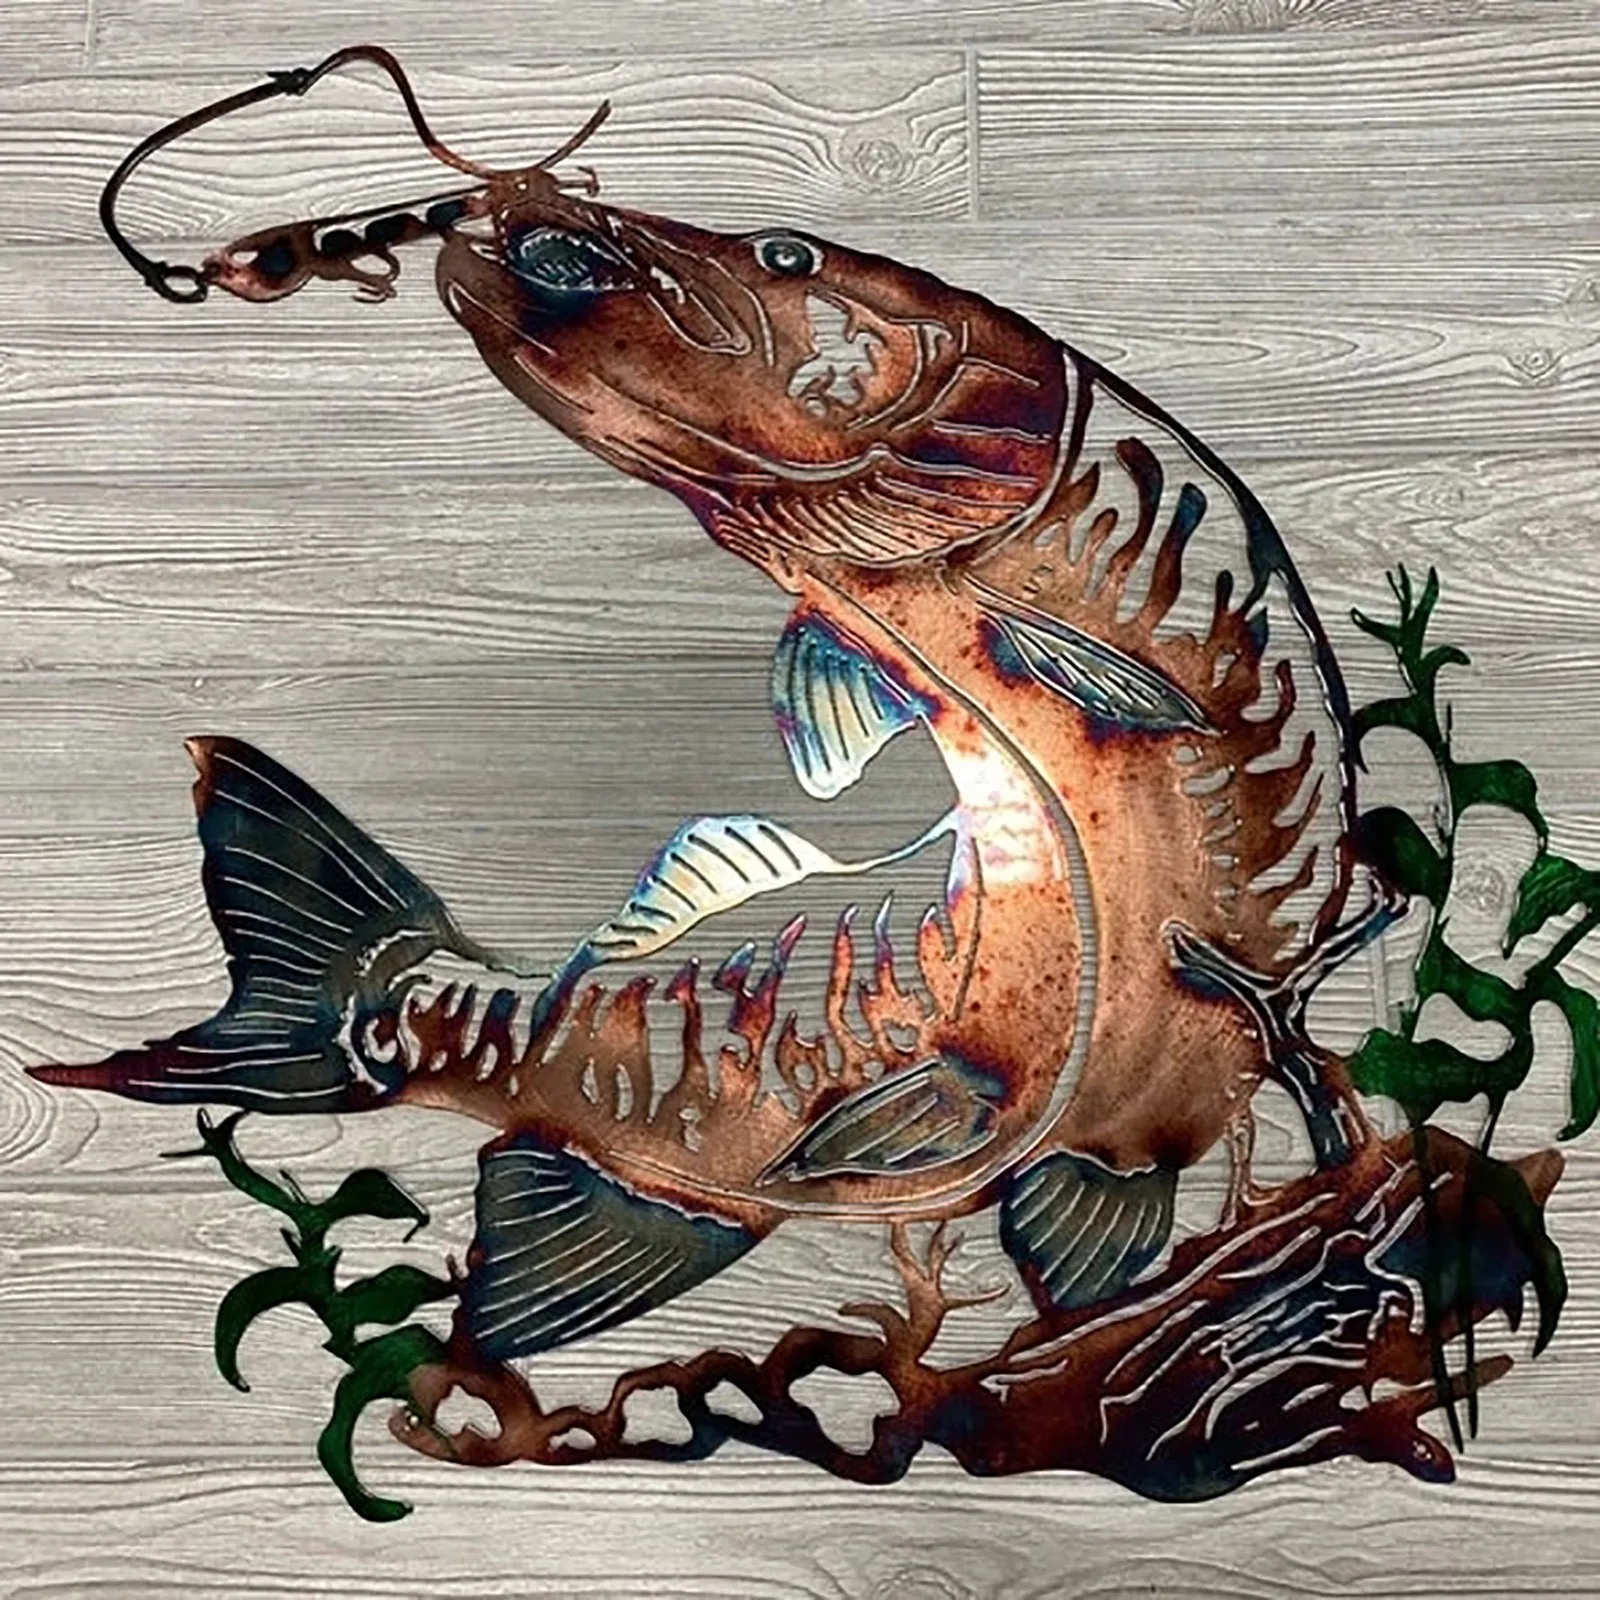 3D Metal Wall Art Decoration Hollow Out Fish Silhouette Sculpture